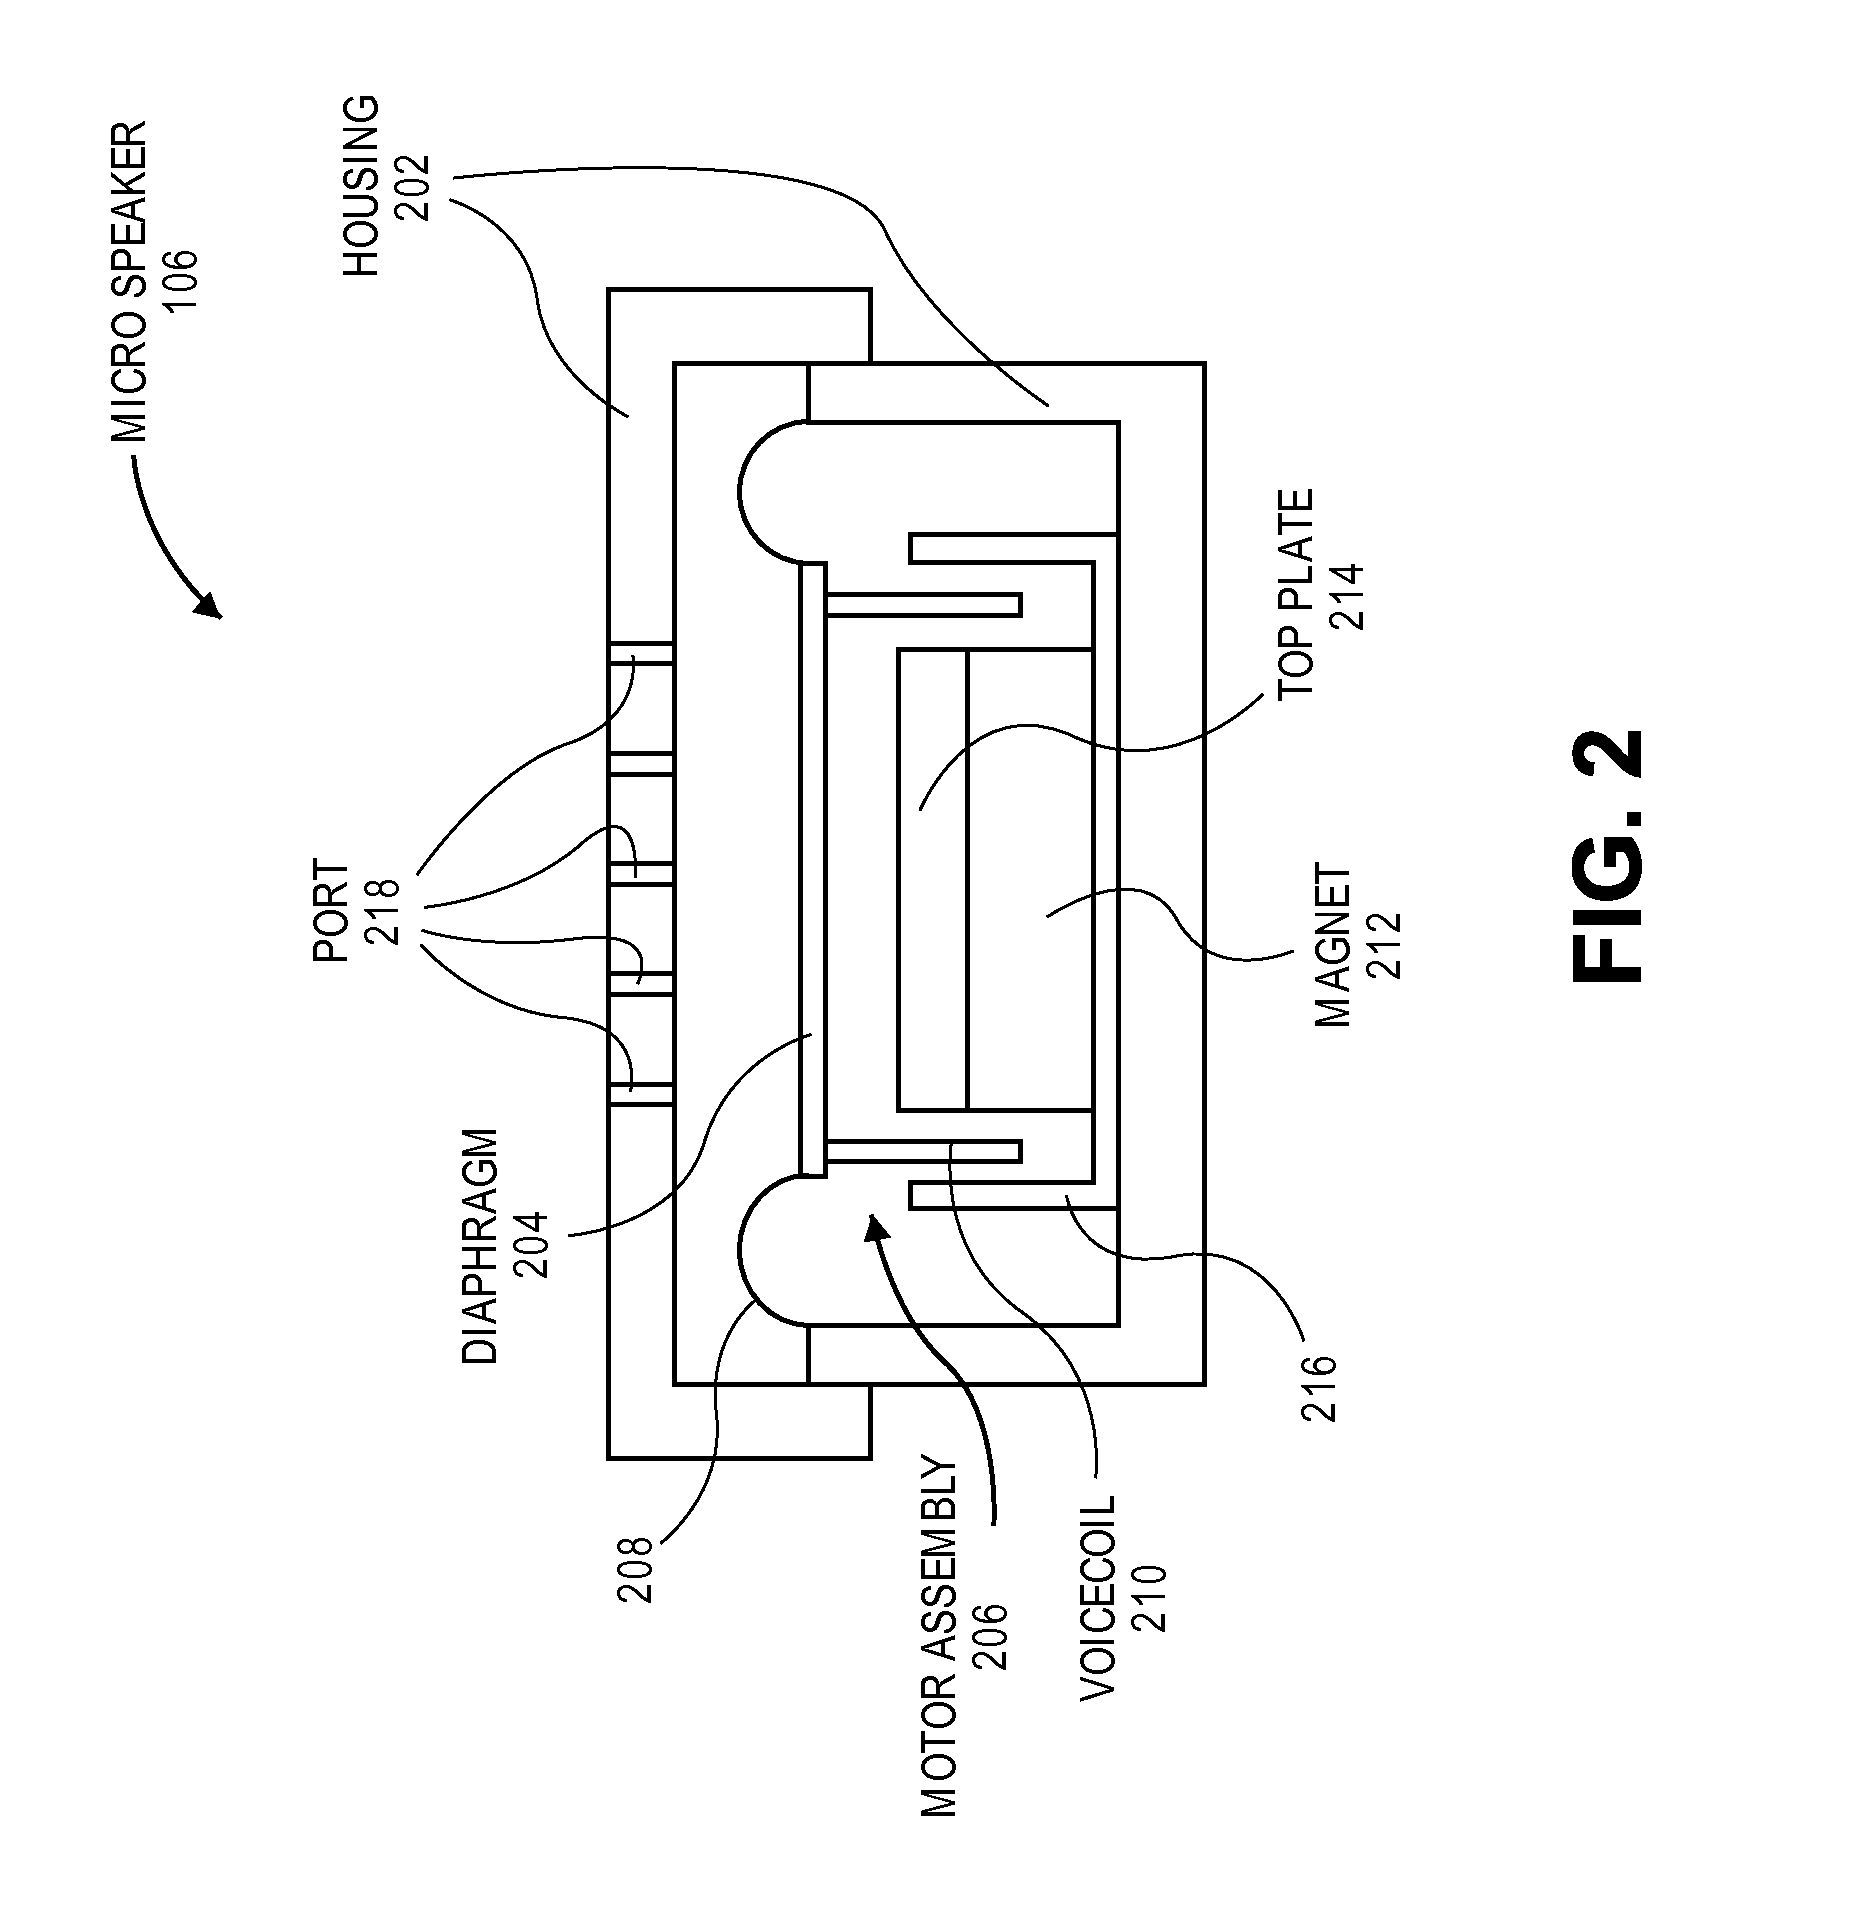 Capacitive position sensing for transducers